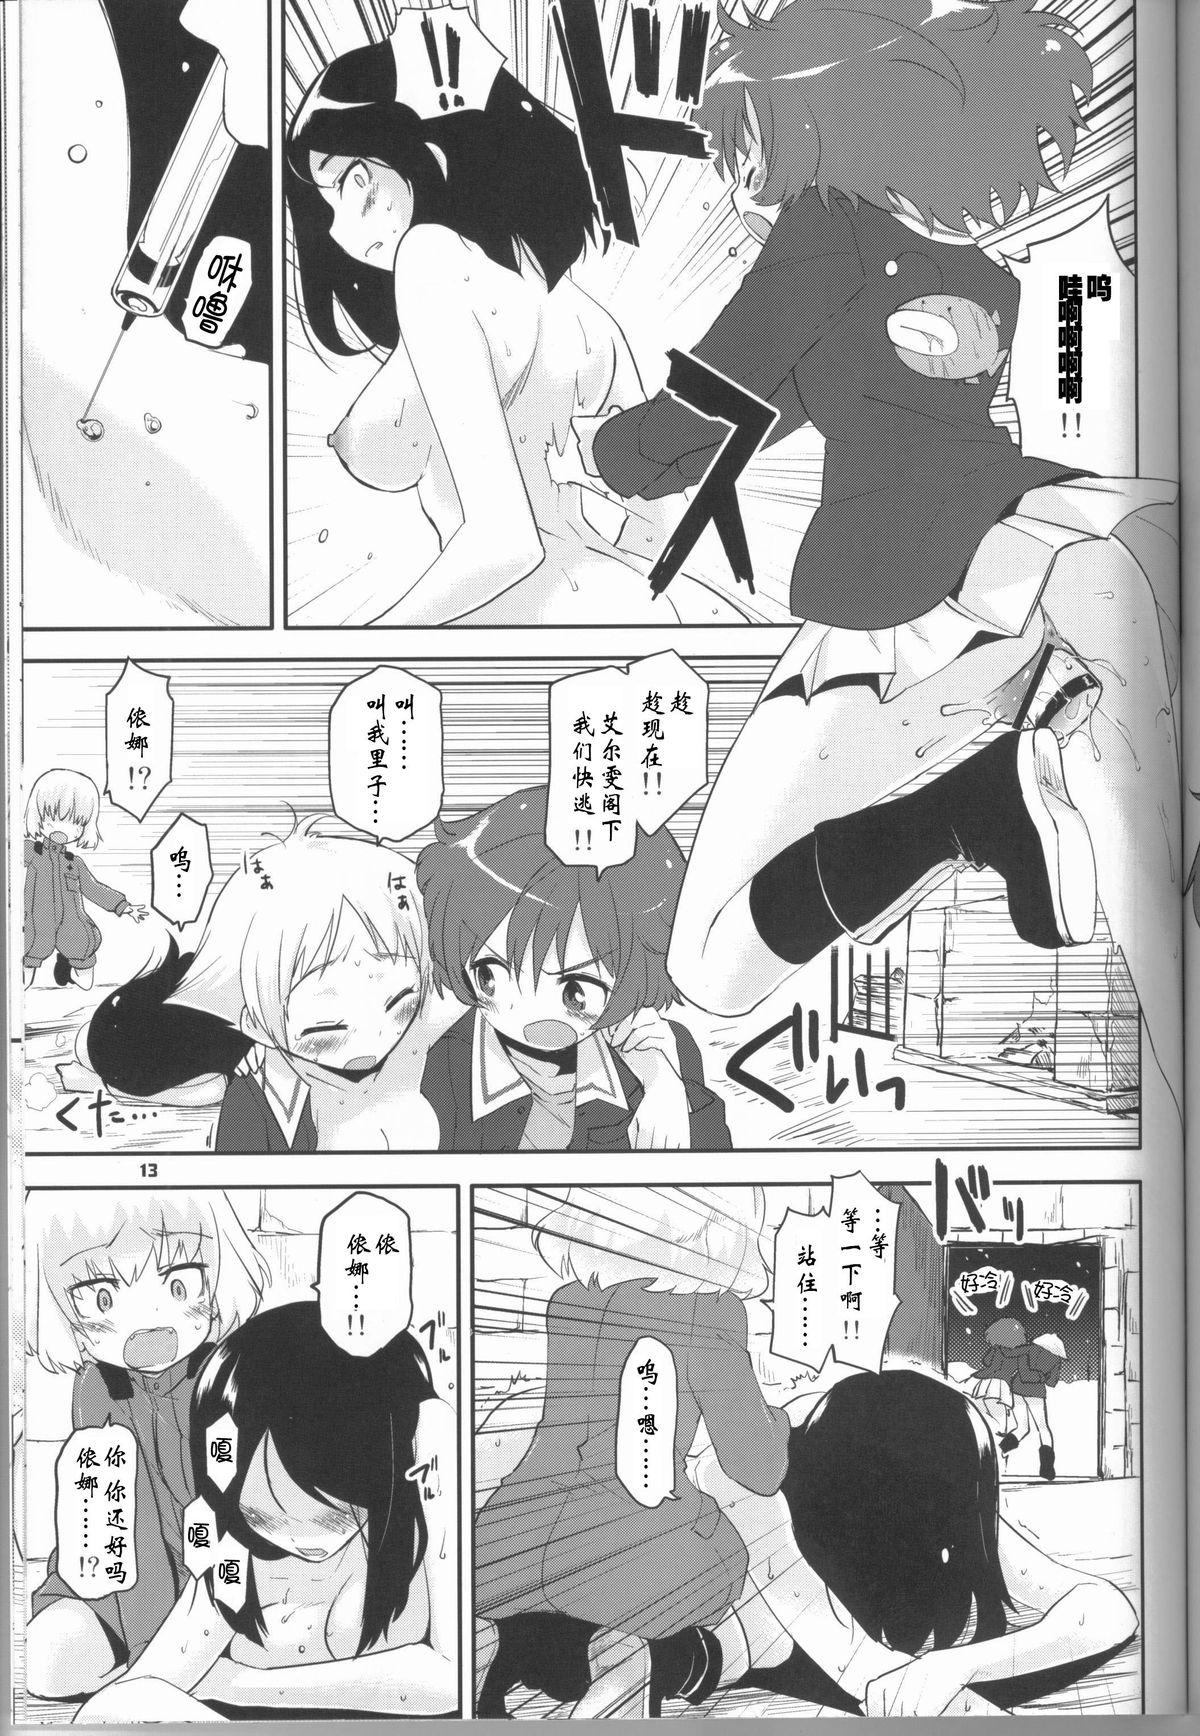 Bangbros The General Frost Has Come! - Girls und panzer Slapping - Page 12